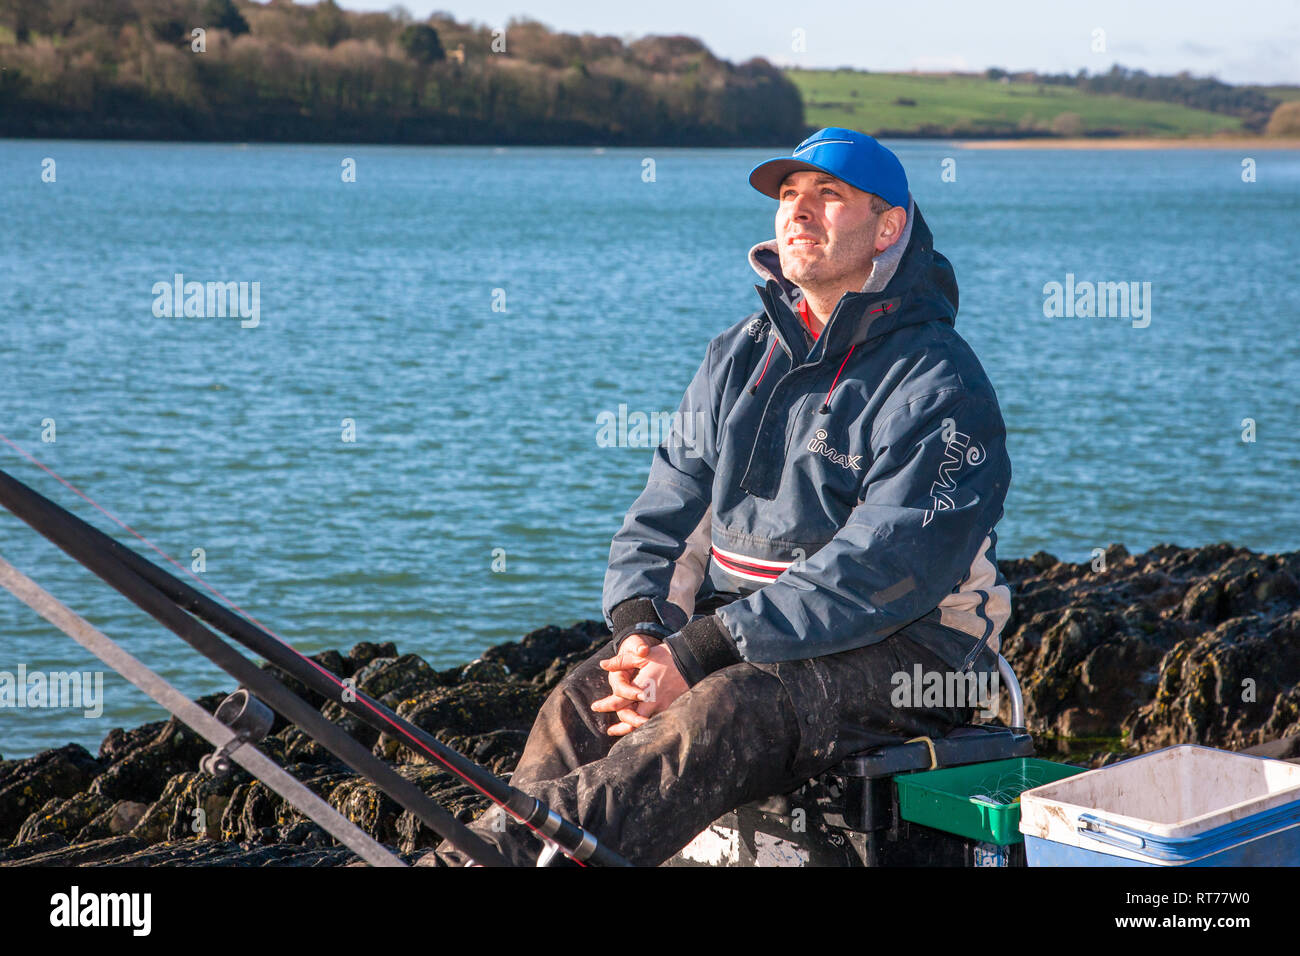 Fountainstown, Cork, Ireland. 28th Feb, 2019. With unseasonal warm weather where tempertures reached 13 degrees, Barry O' Rourke from Carrigaline takes the opportunity spend his spare time fishing from the rocks in Fountainstown, Co. Cork, Ireland Credit: David Creedon/Alamy Live News Stock Photo